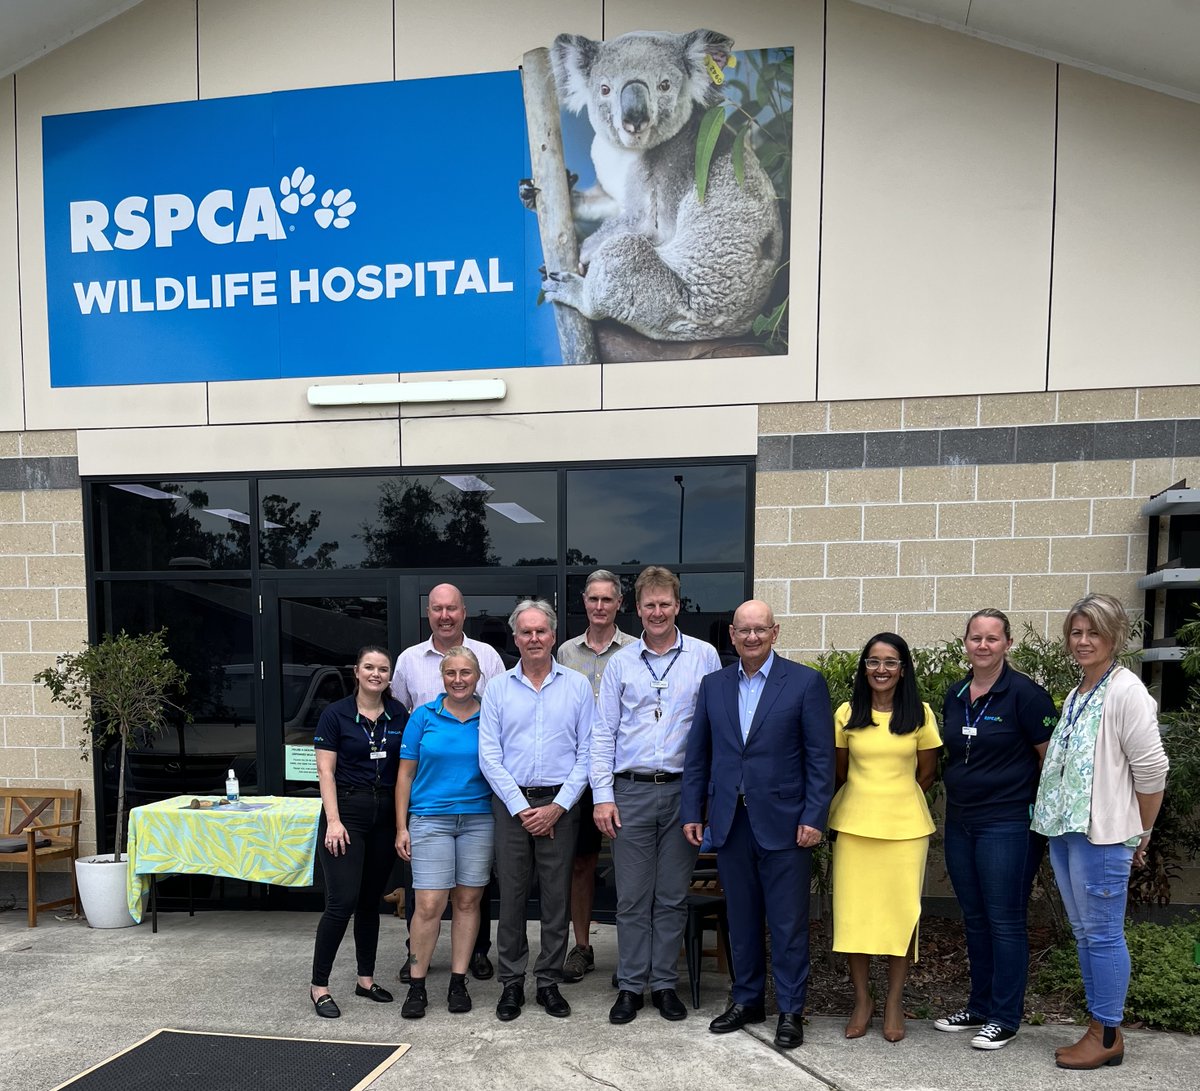 Great to visit @RSPCAQld Wildlife Hospital at Wacol today with Sp...